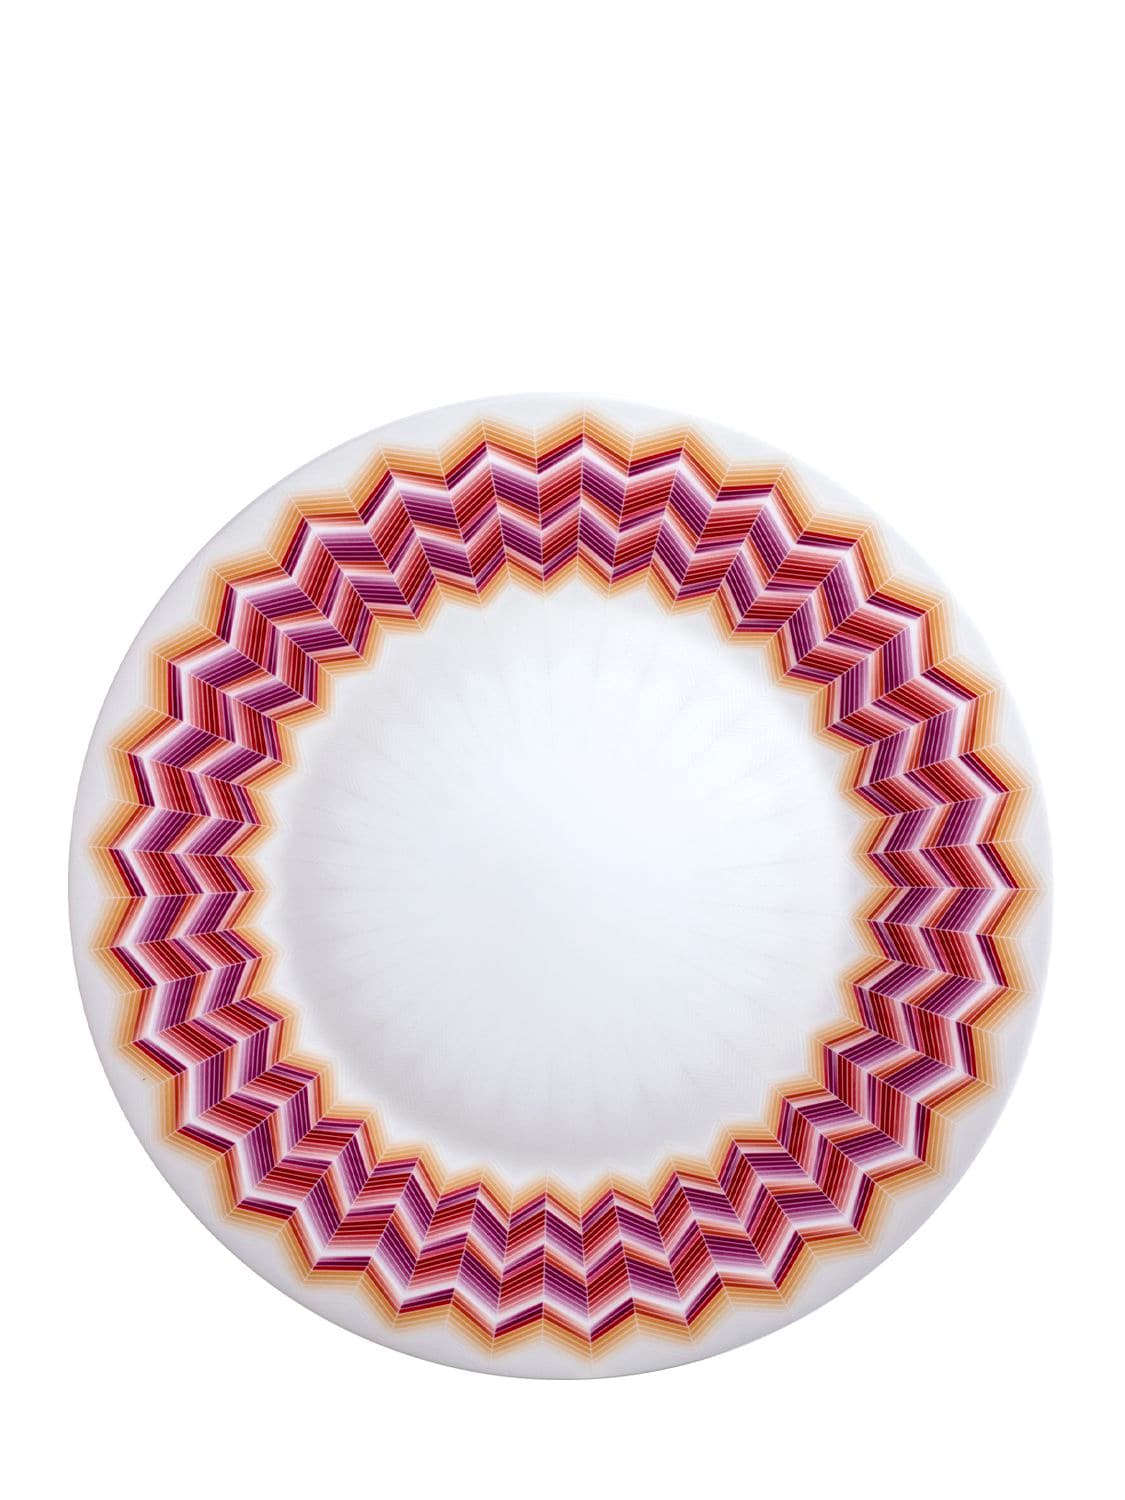 Missoni Home Collection Zig Zag Jarris Charger Plate In Multicolor